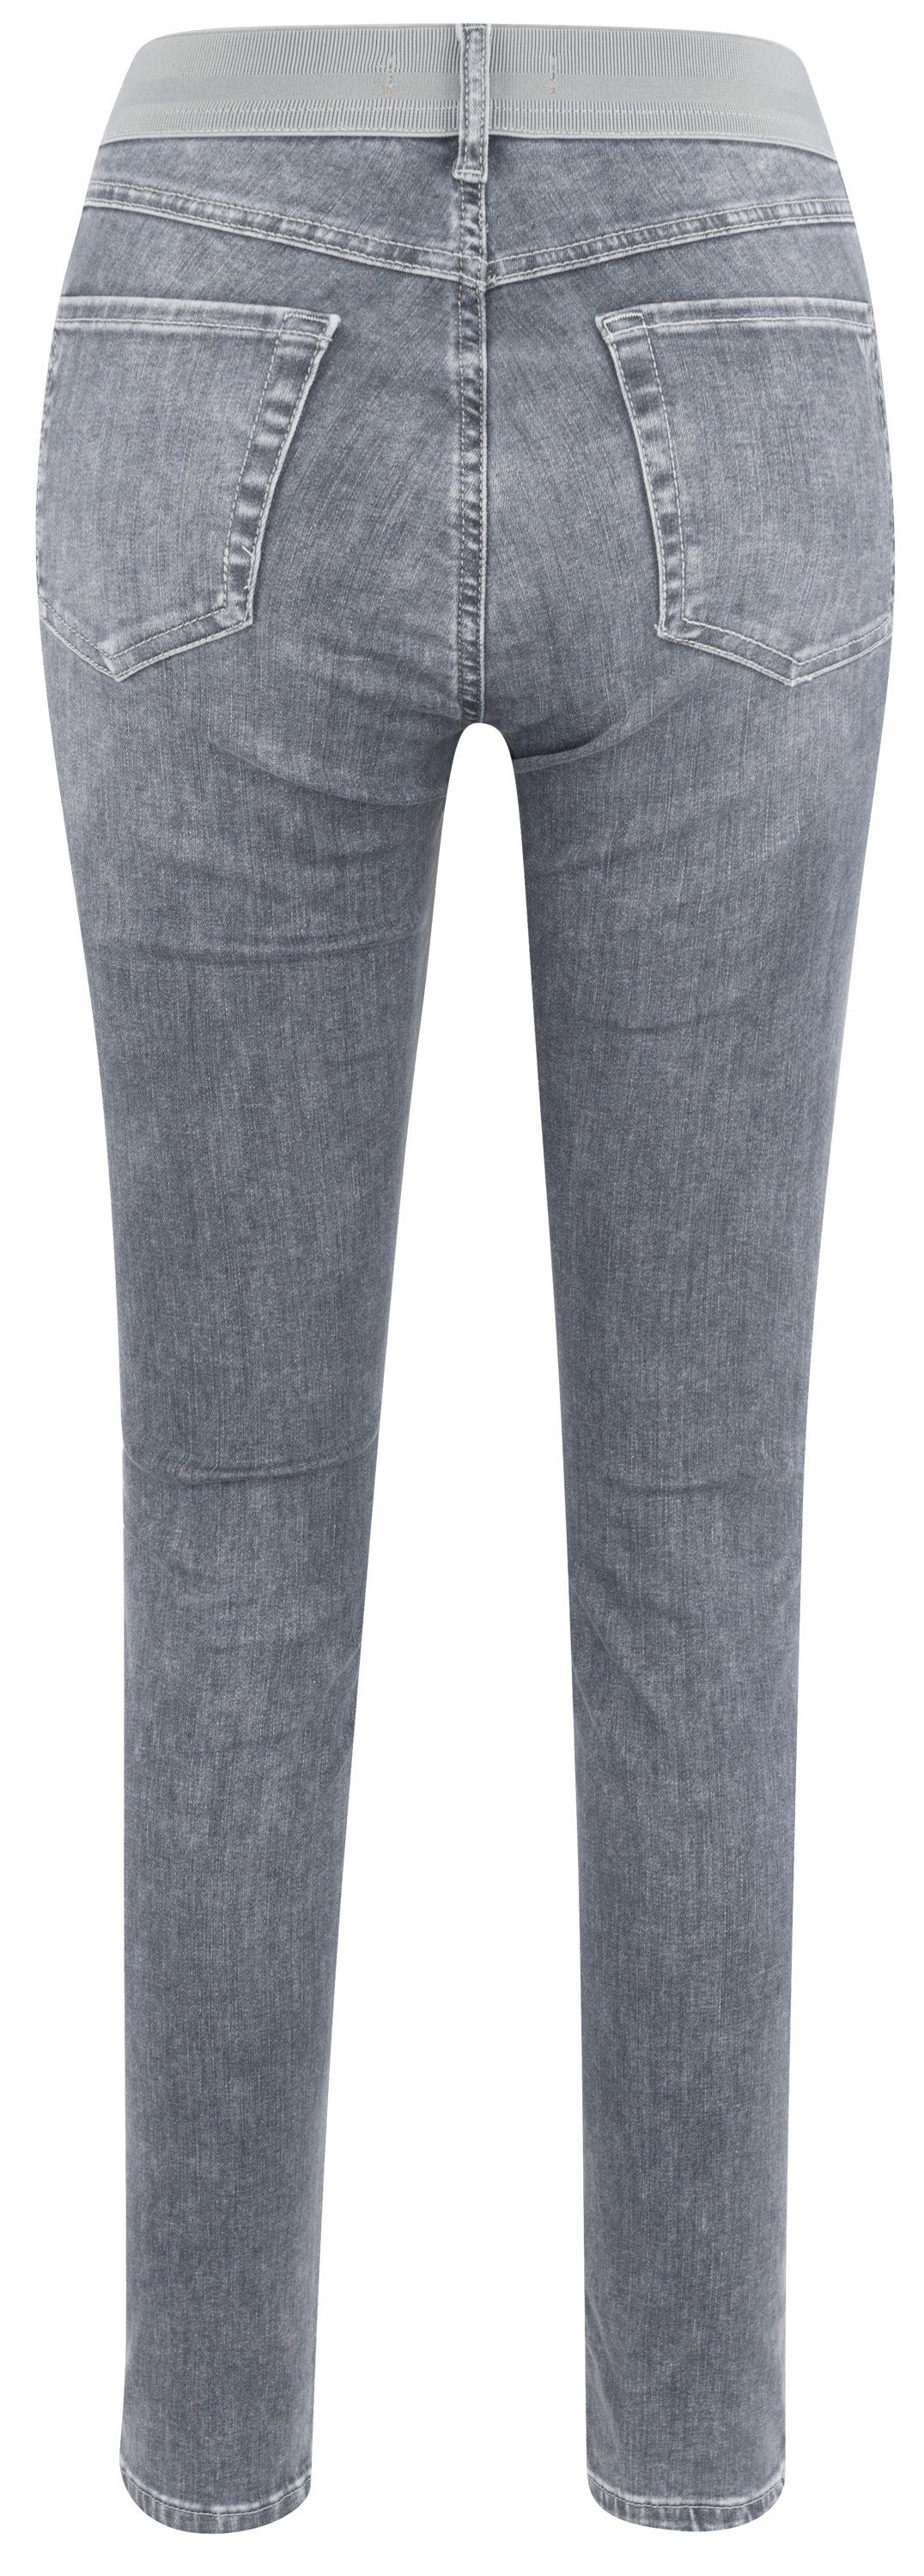 JEANS grey ANGELS SIZE used 123730.1358 used Stretch-Jeans ONE grey ANGELS mid 1358 mid 399